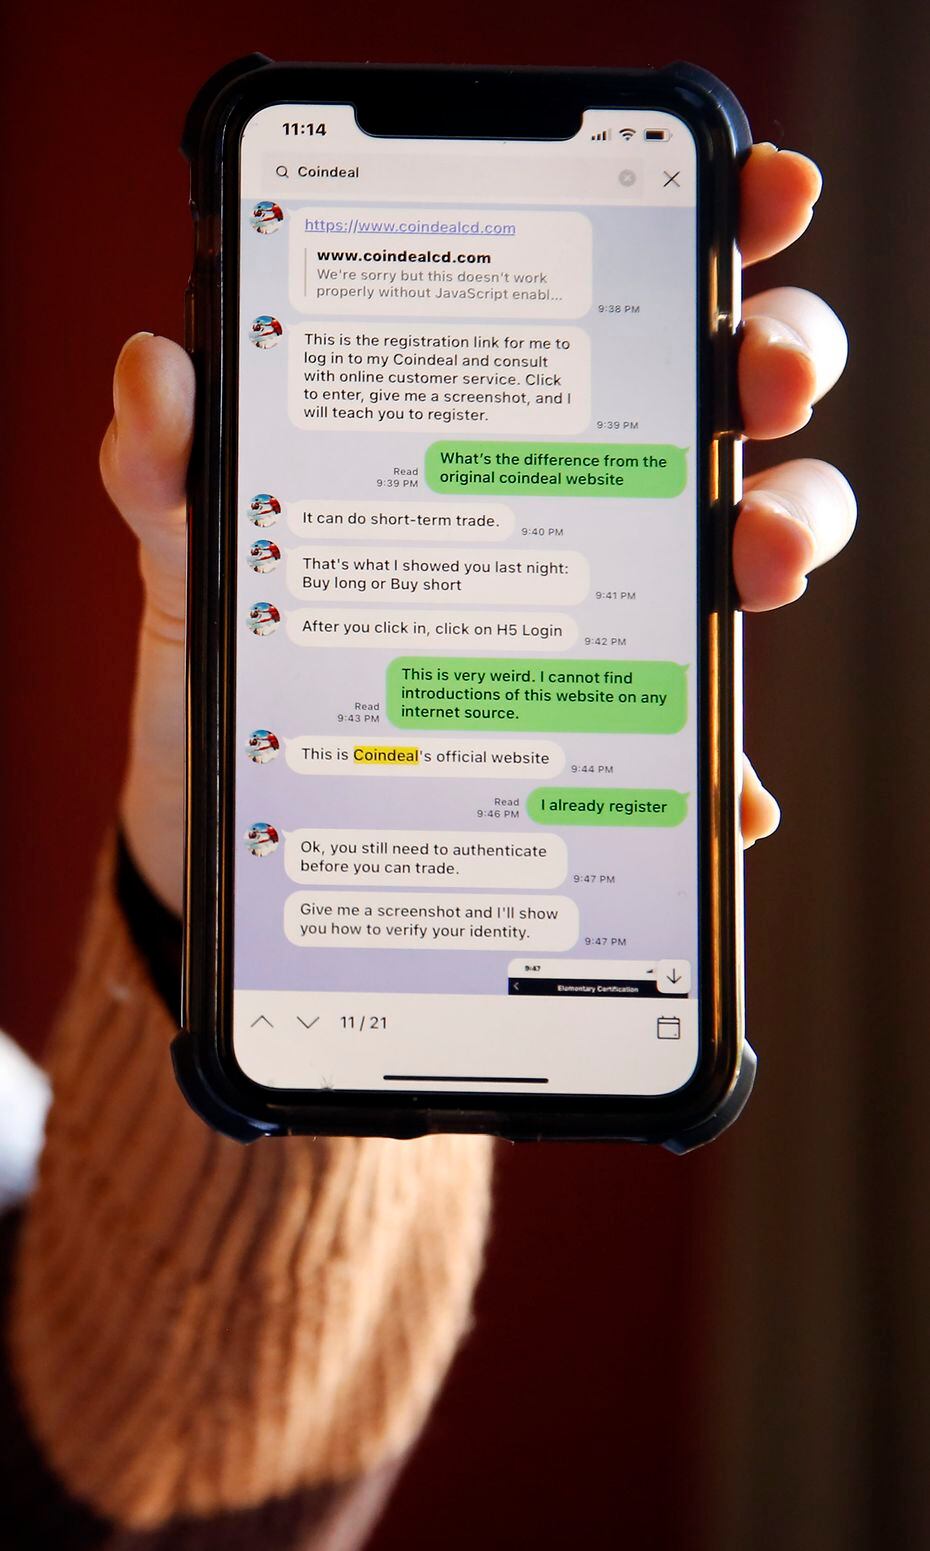 Yik Li shows a screenshot of one of the text conversations she had with a man that led to...